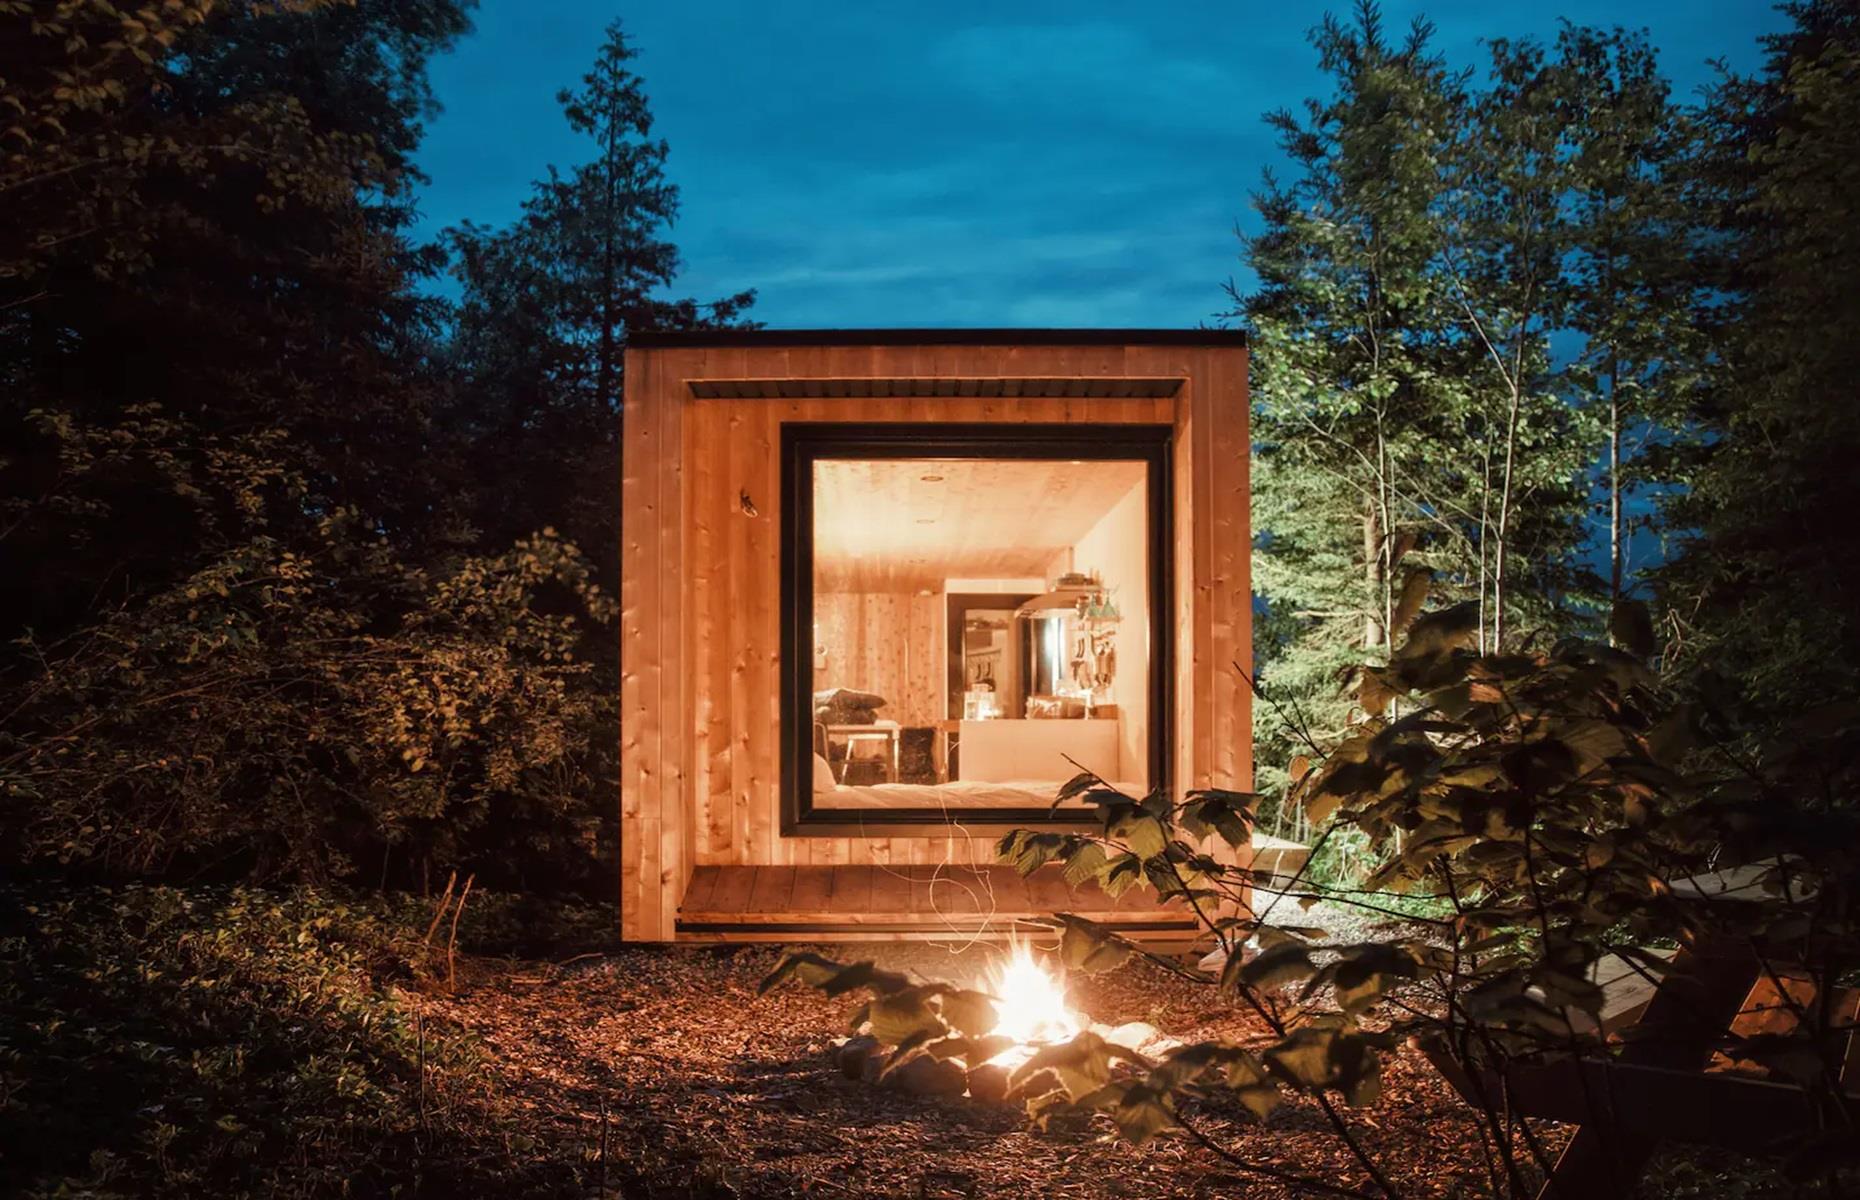 <p>Plus, guests can enjoy access to a private terrace with an outdoor fire pit and a hot tub that's located in the middle of the forest. What could be more relaxing than that?</p>